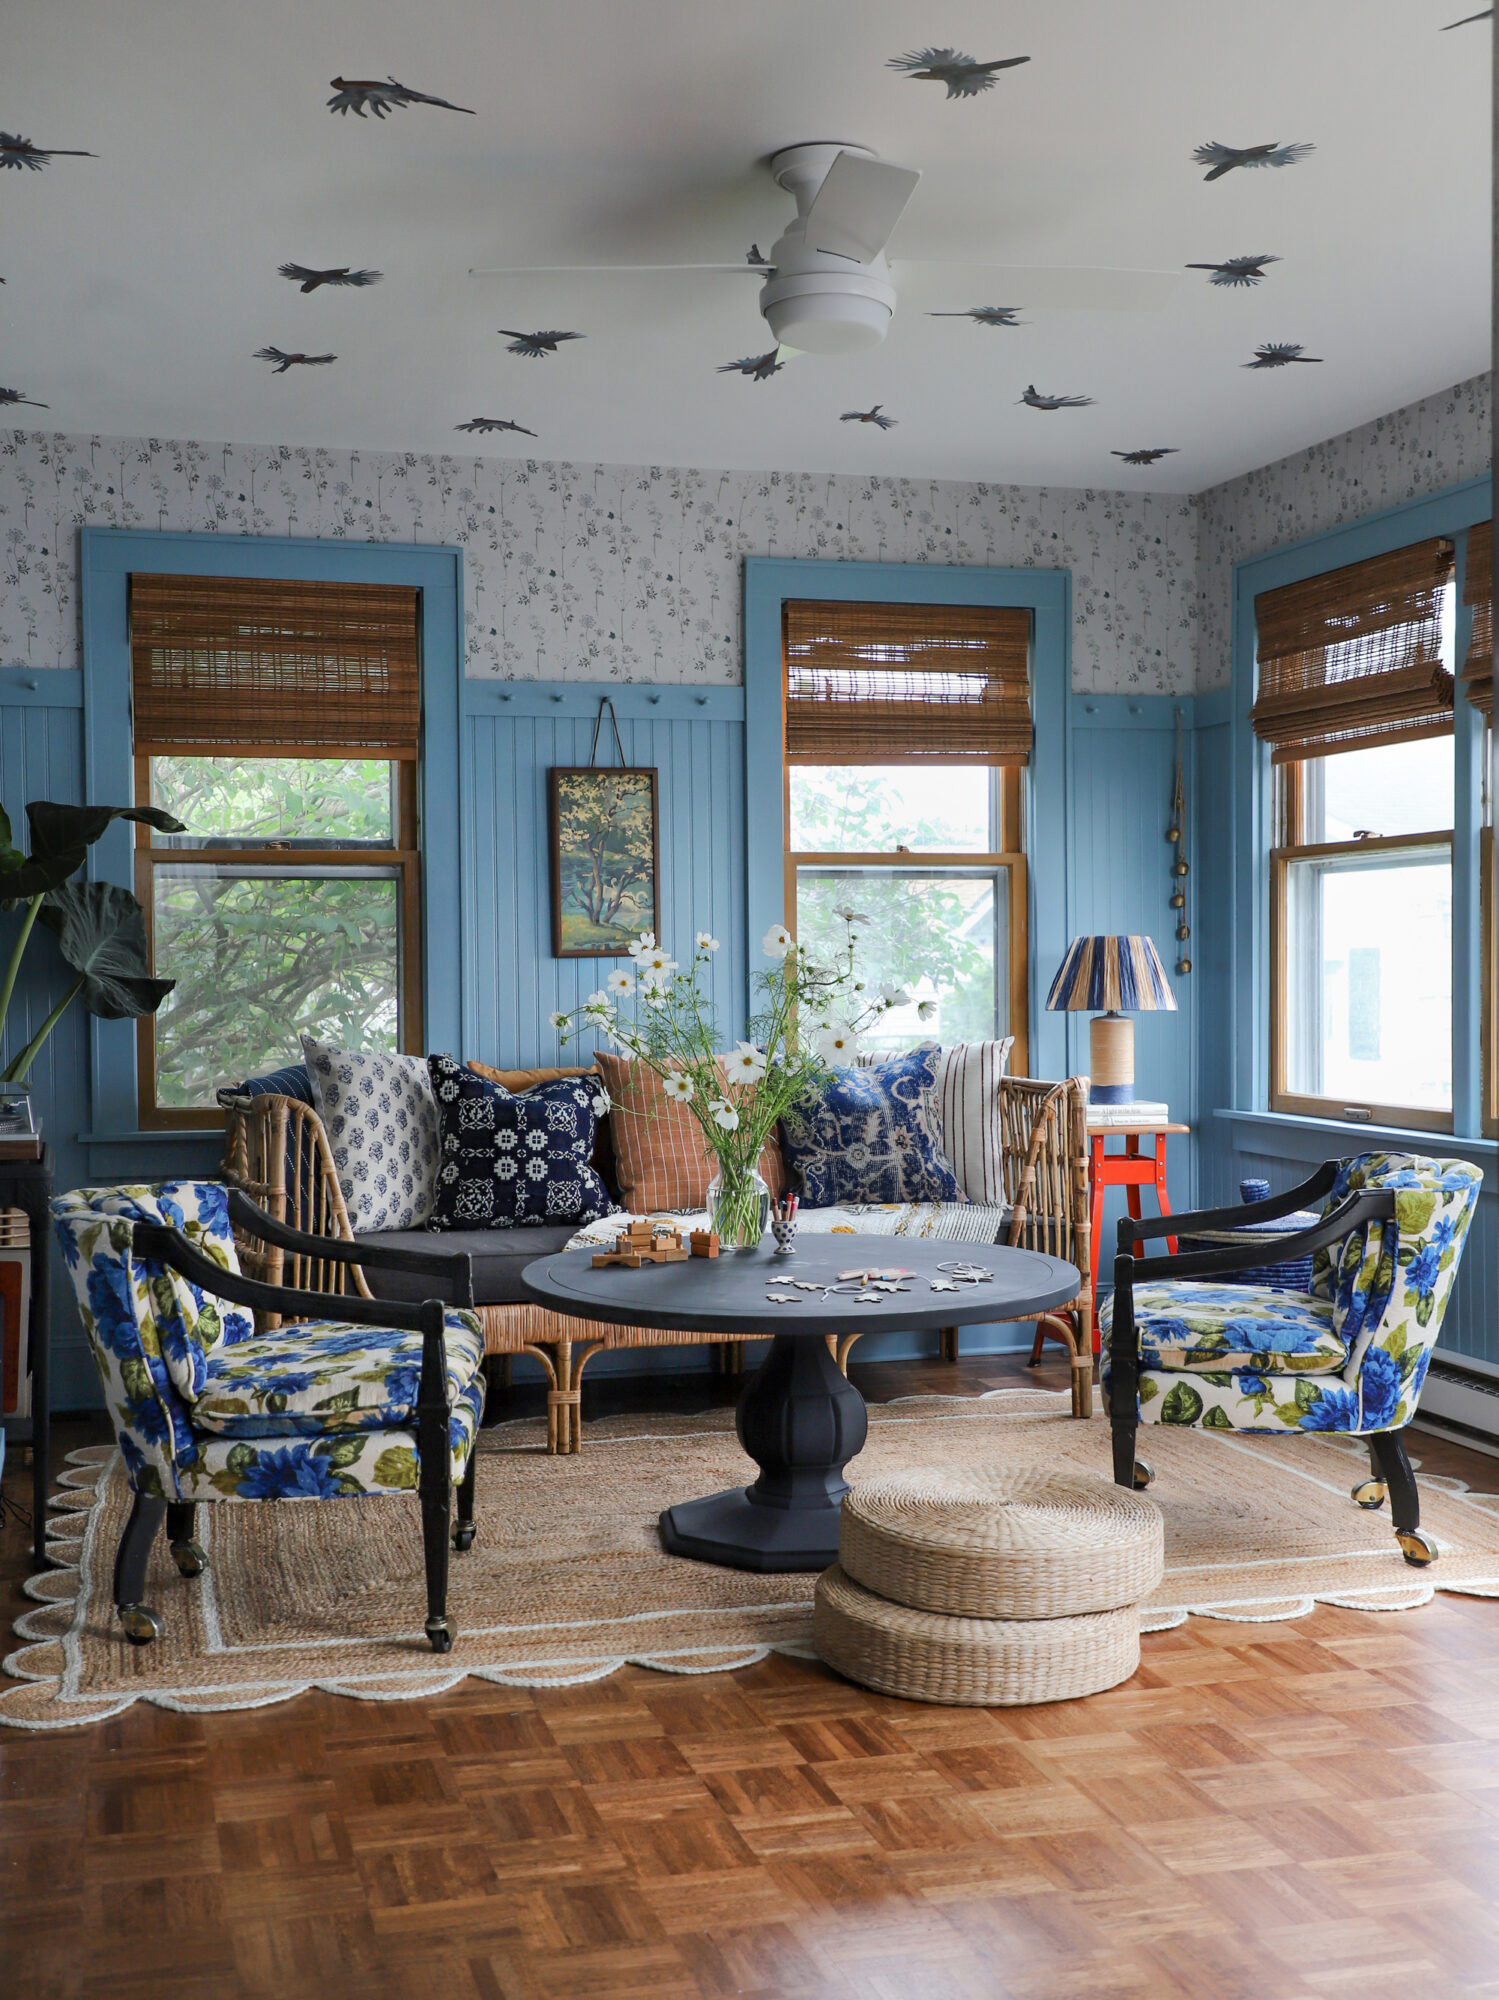 Beautiful sunroom with eclectic thrifted furniture, blue board and batten details and seating for the whole family.